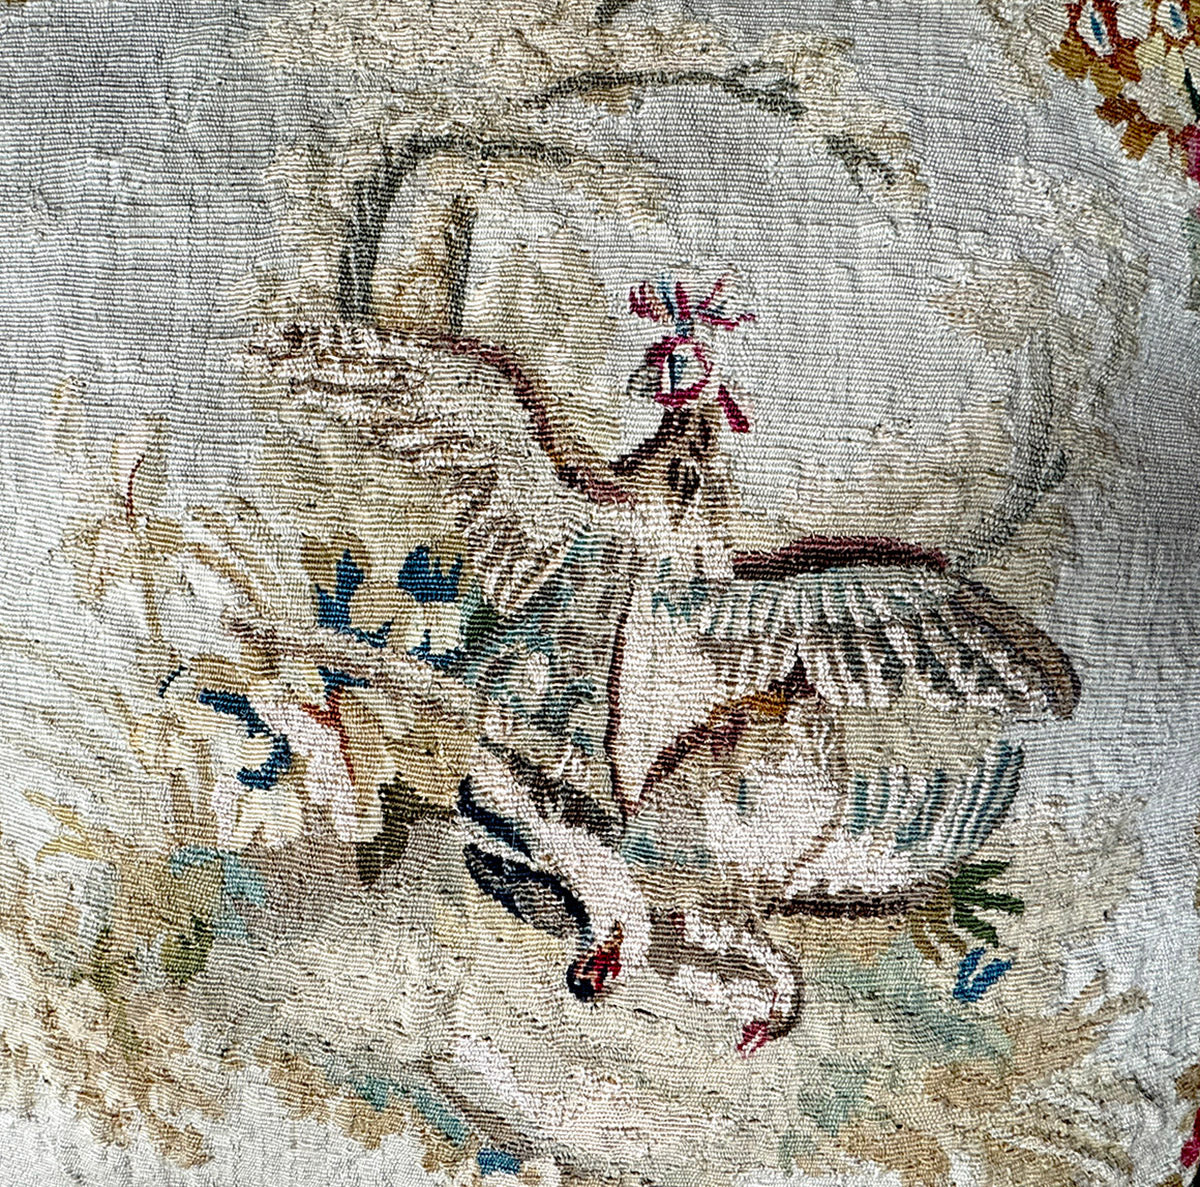 Opulent Large Antique 18th Century French Aubusson Tapestry Pillow #3, Falcon, Dove, 26" x 27" + Fringe